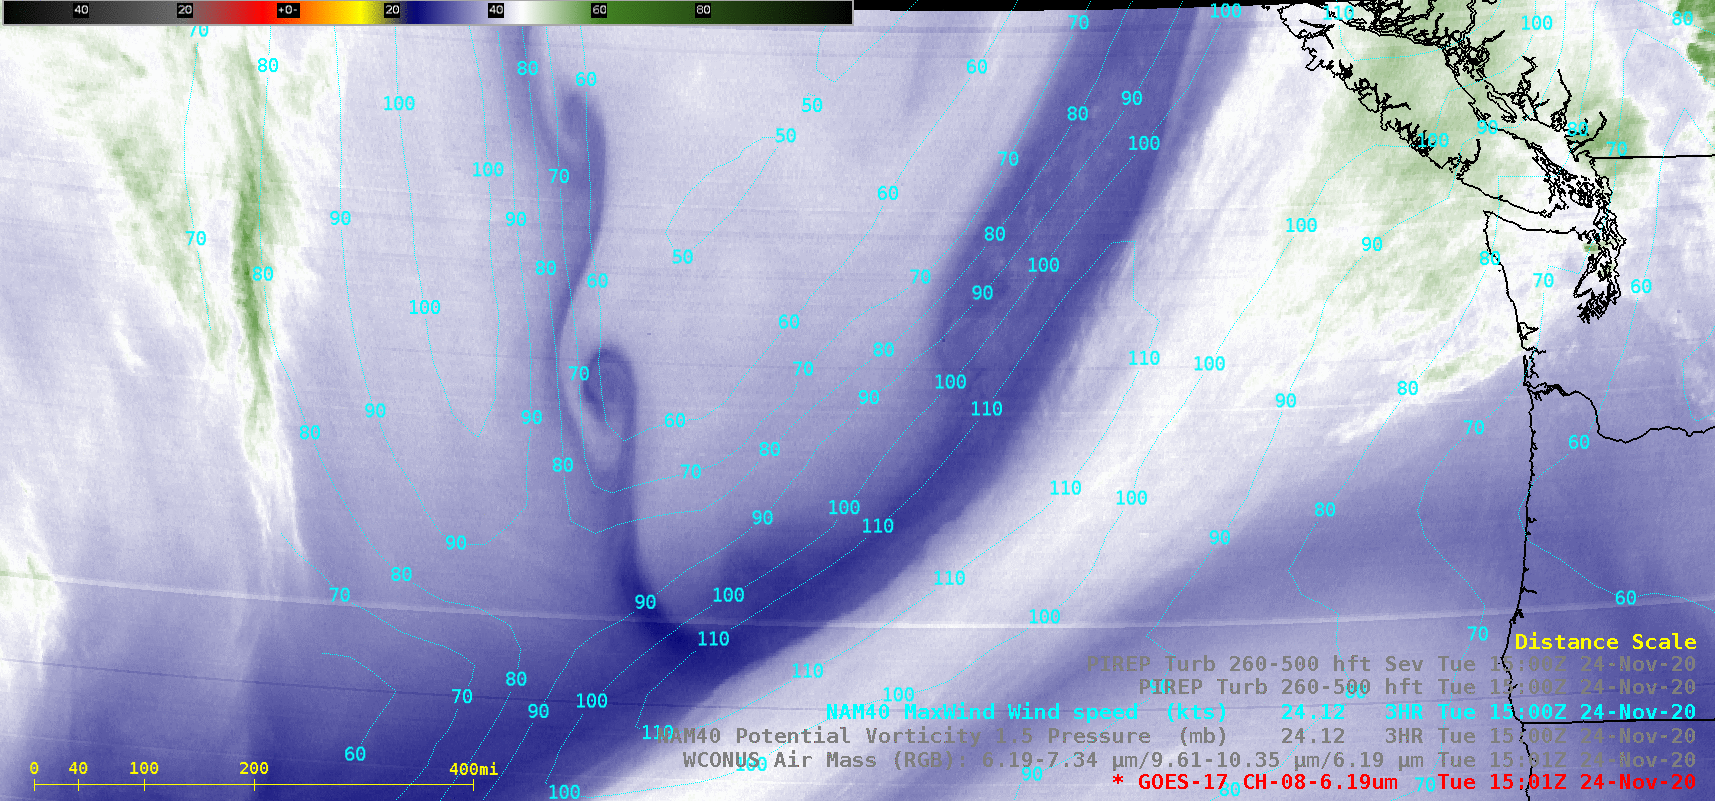 GOES-17 Upper-level Water Vapor (6.2 µm) images, with isotachs of NAM40 model maximum wind speed [click to enlarge]